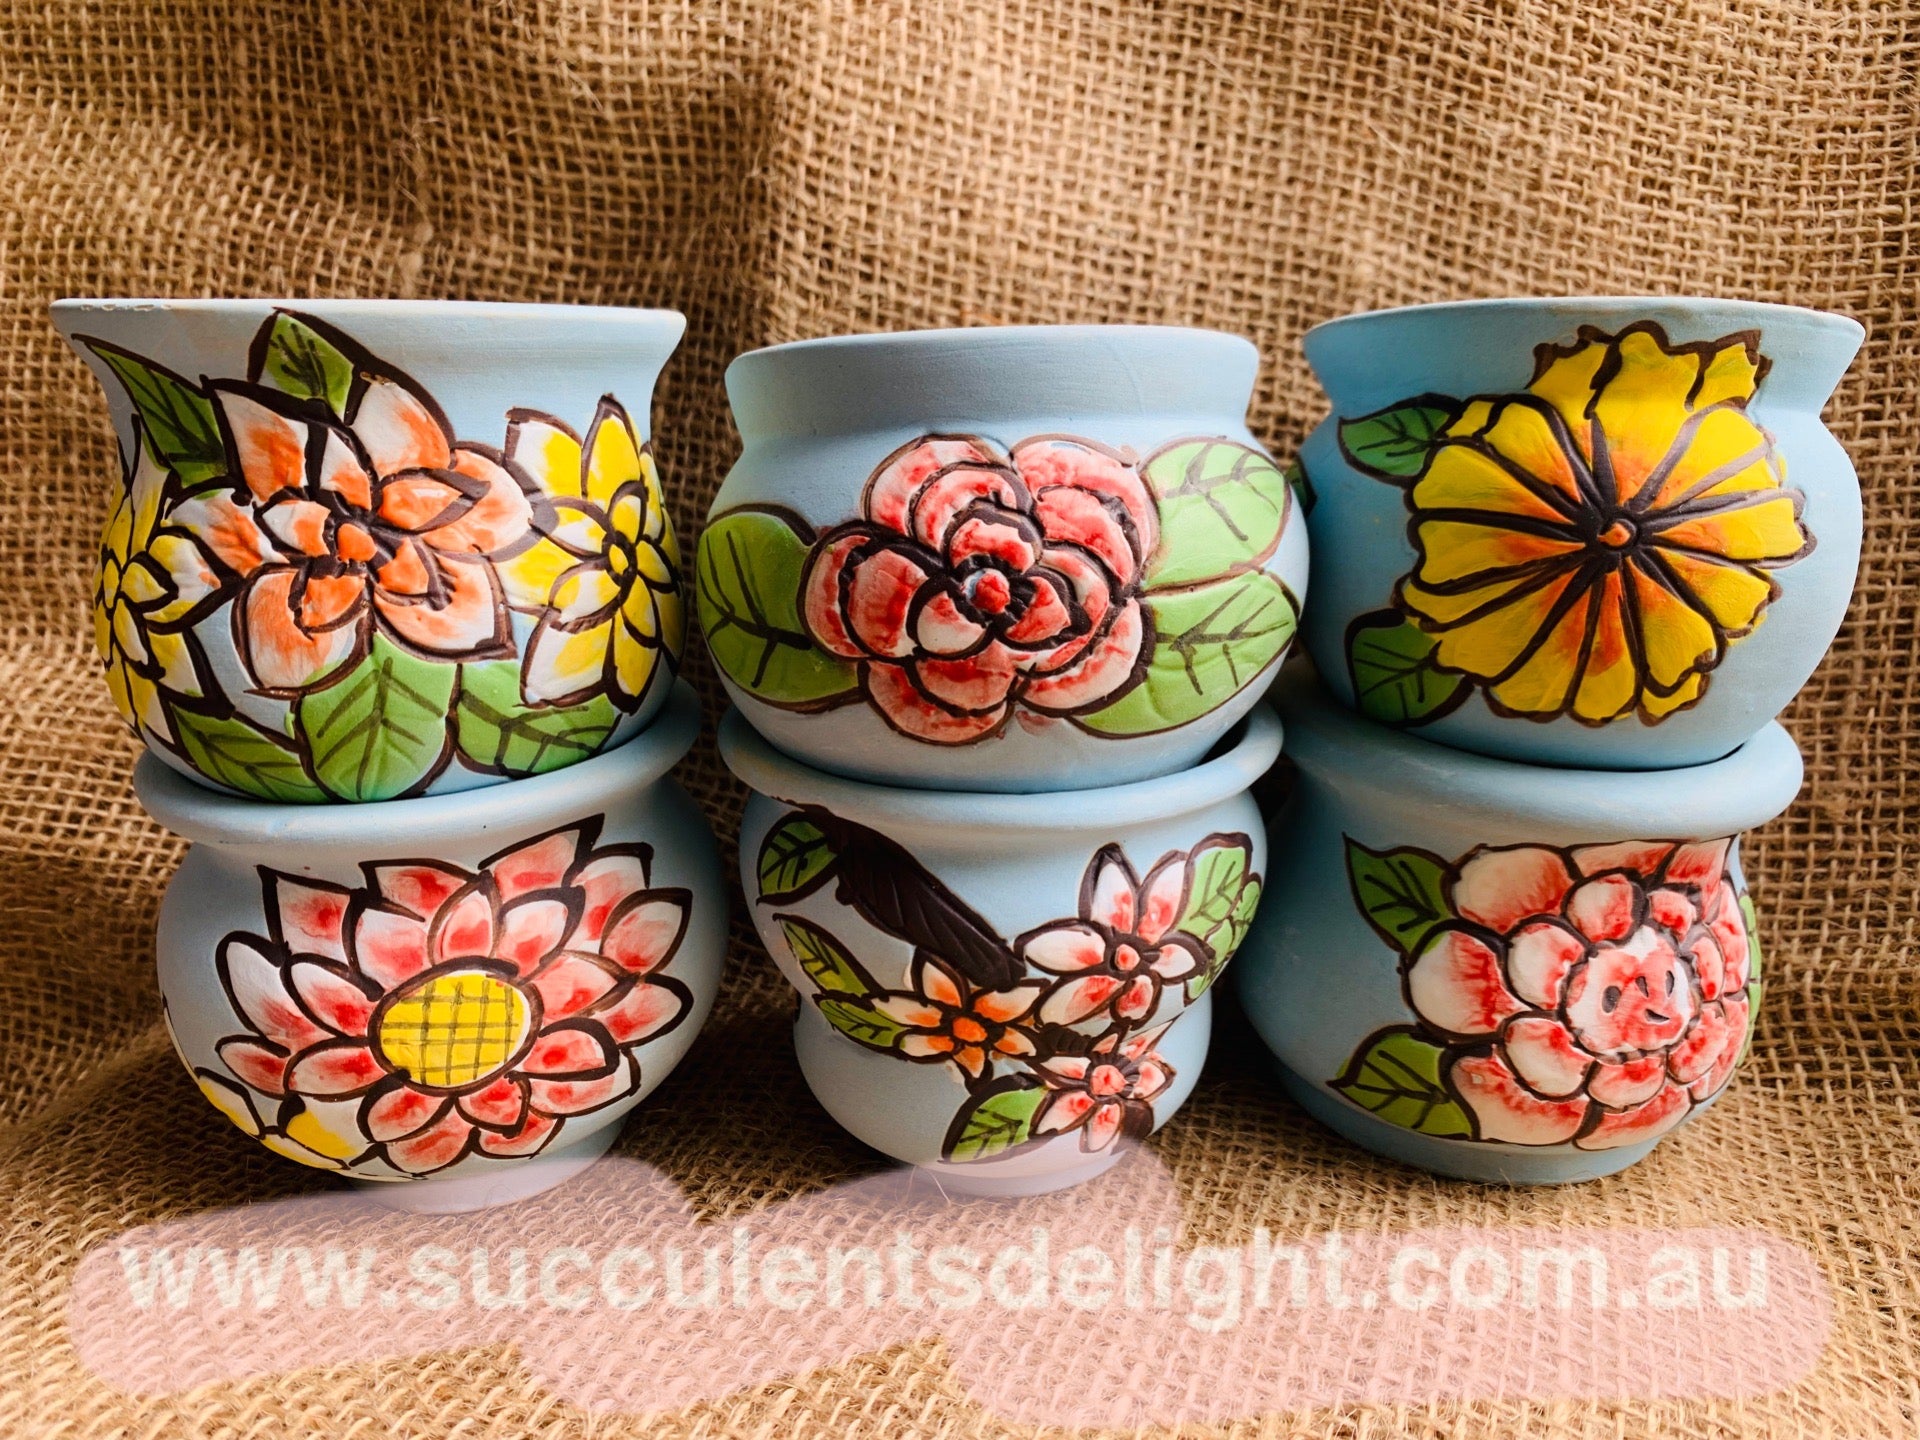 Hand Crafted floral pots 延禧盆套装